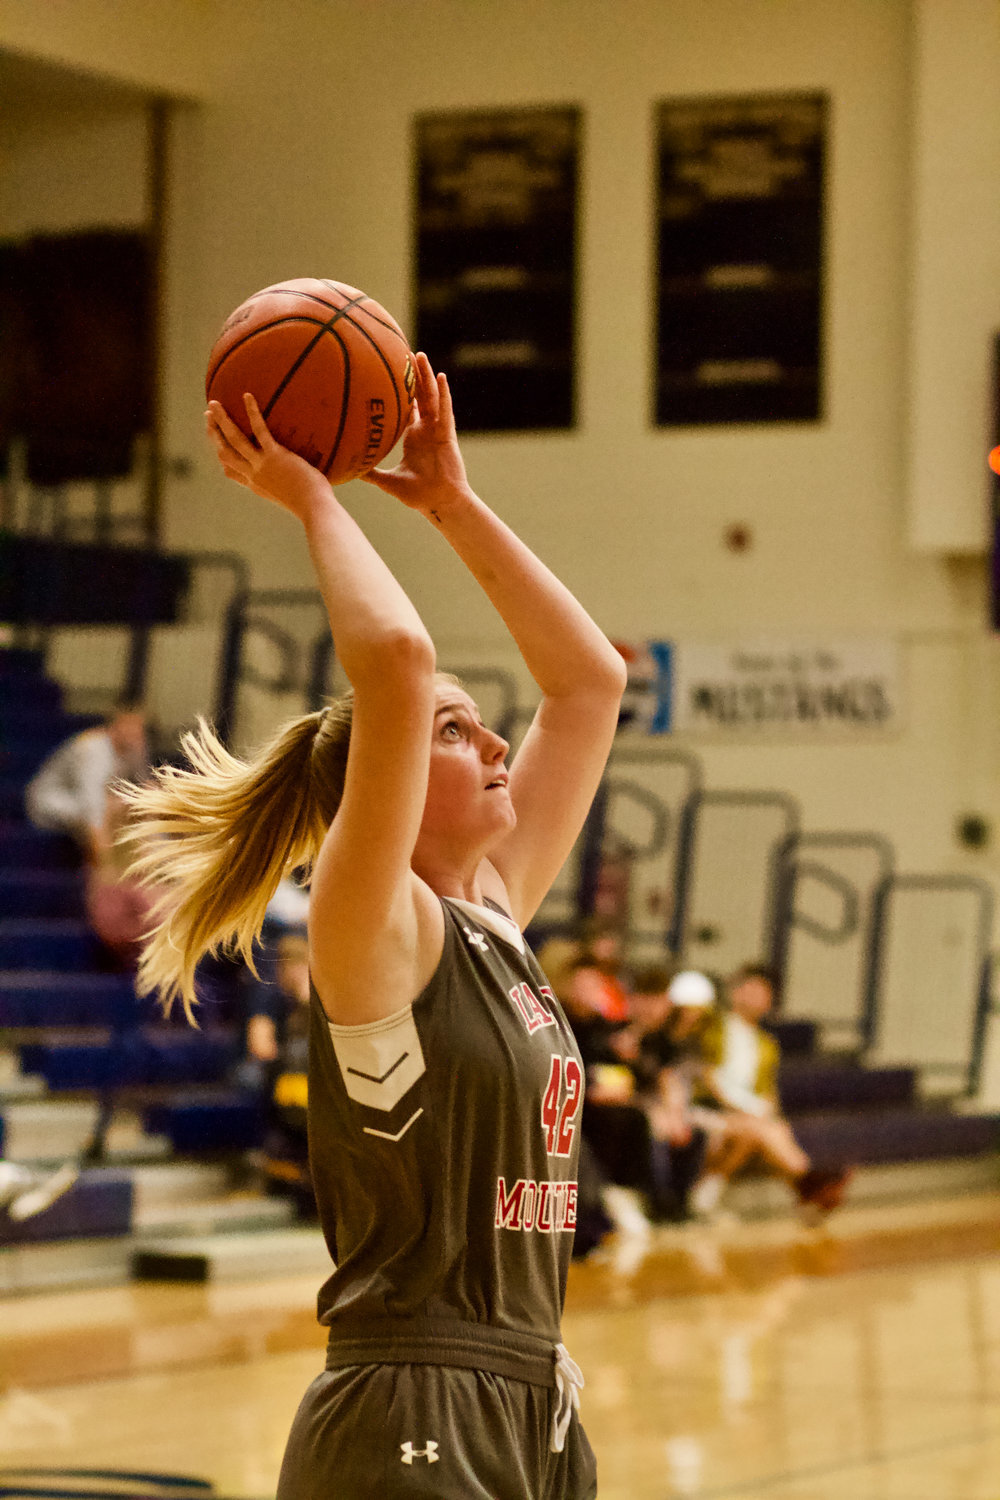 Senior Belle Miller leads the Mounties in scoring and rebounding with 15 points and 9 rebounds per game.